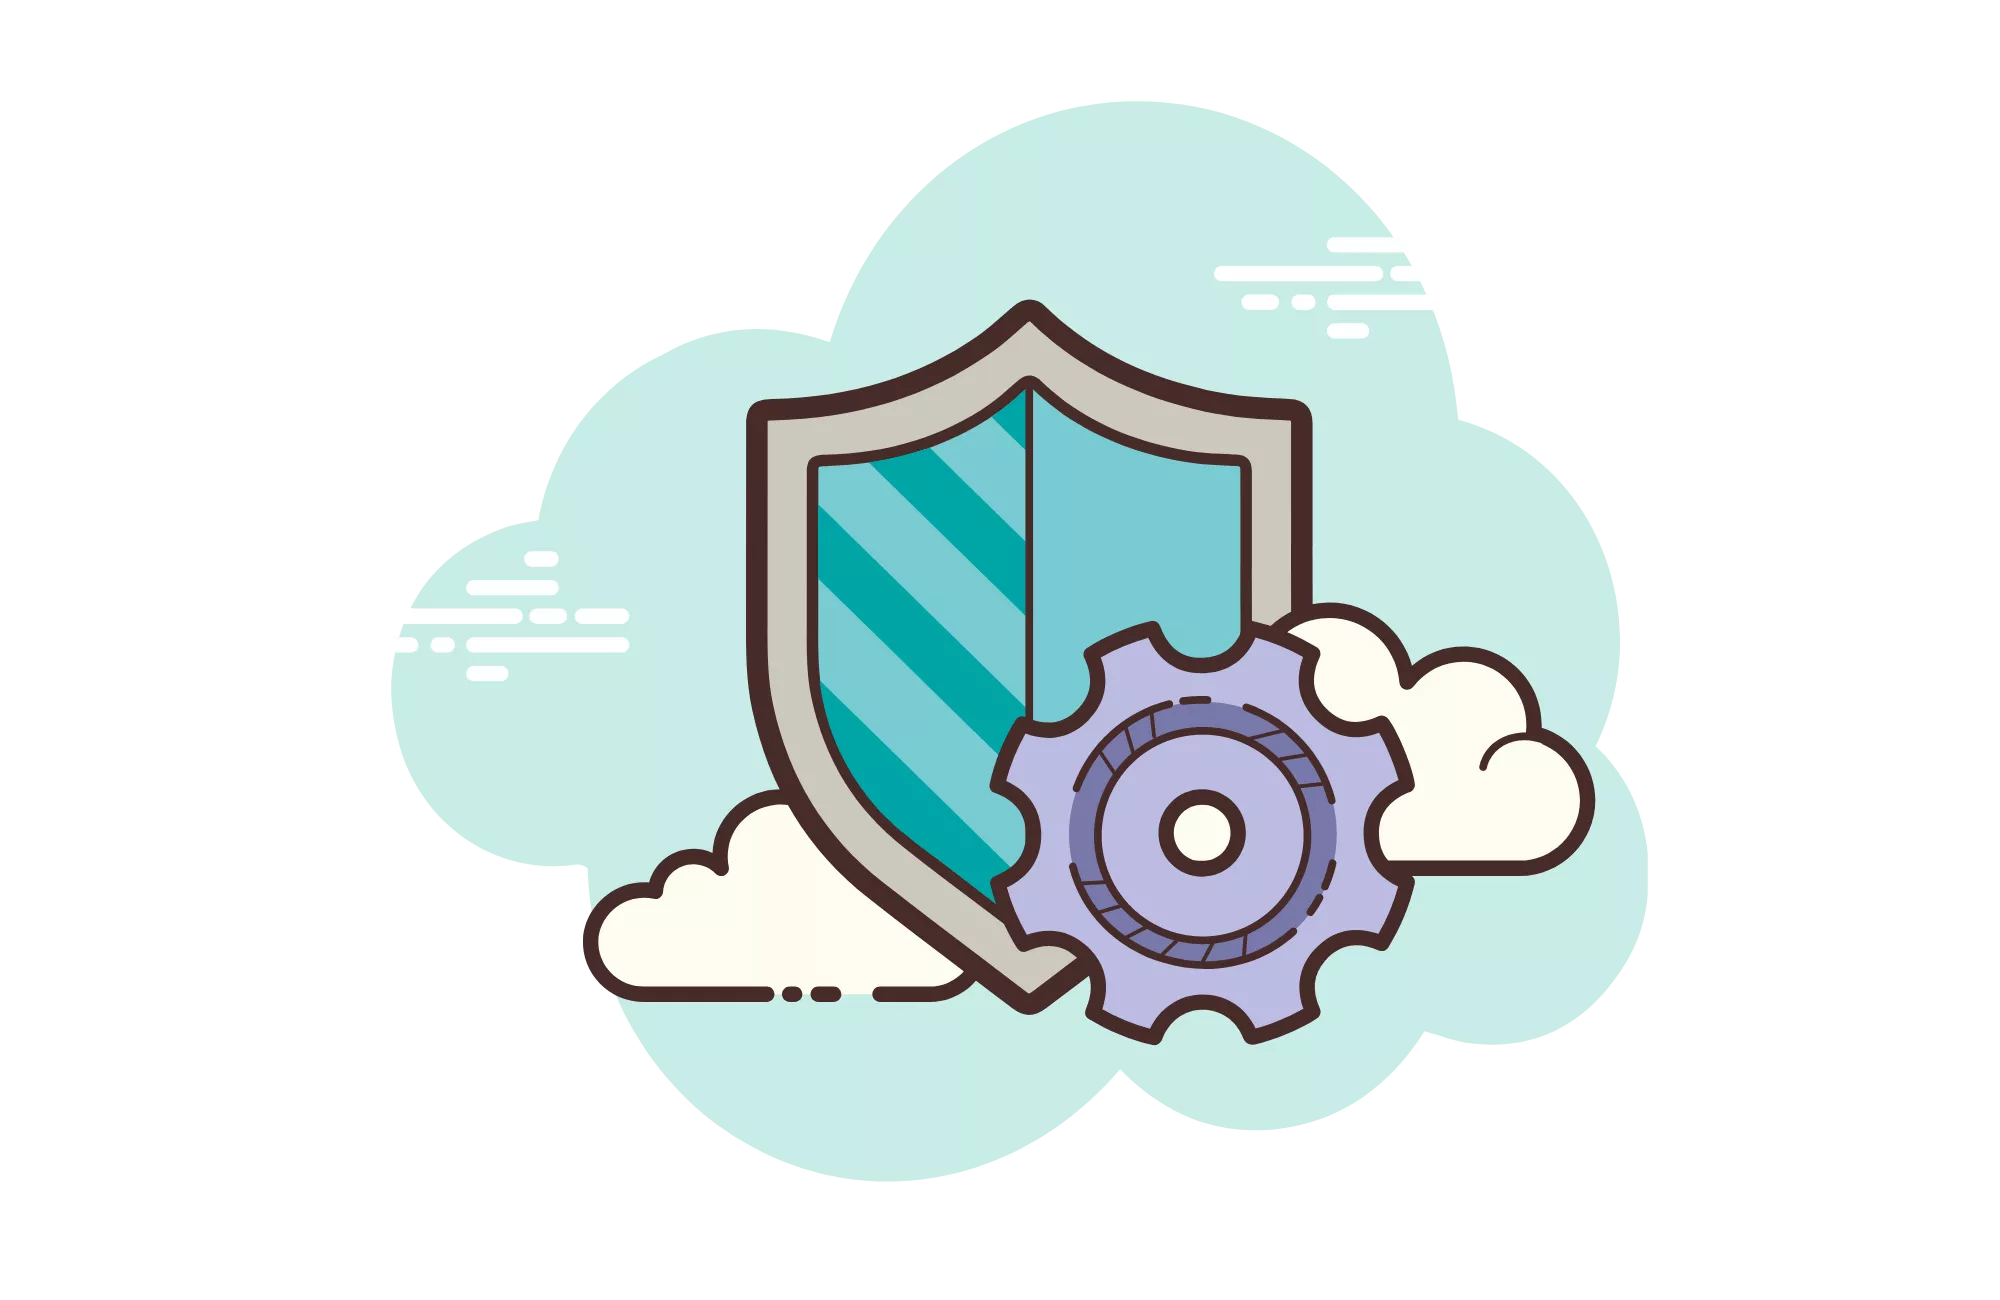 graphic of a shield with a gear icon and clouds to protect merchants form the paypal chargeback fee